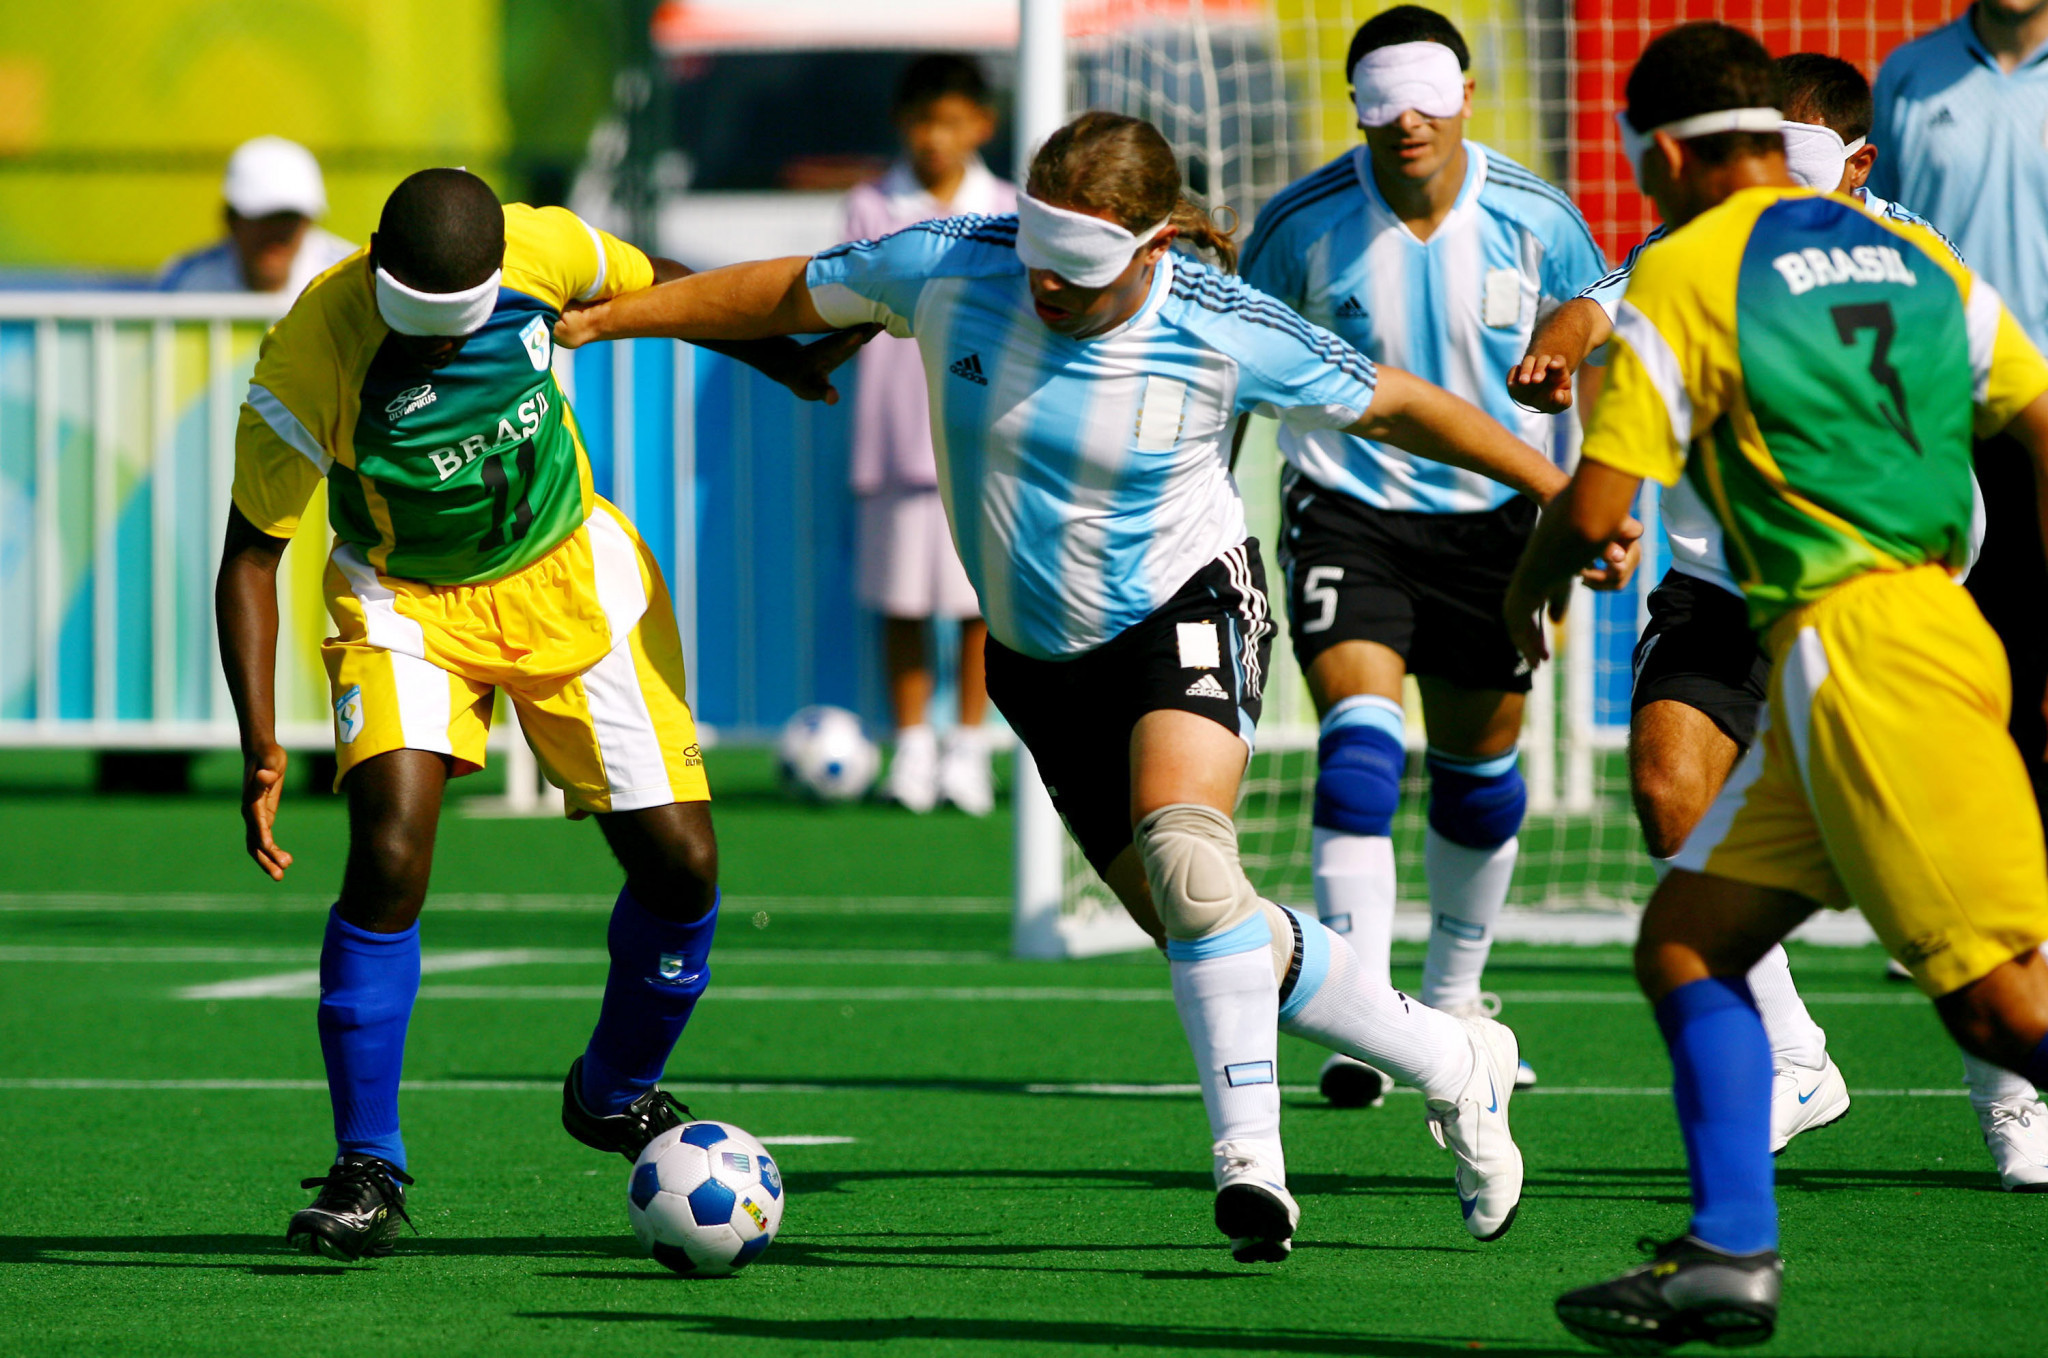 Two-time world champion Cerega becomes blind football coach